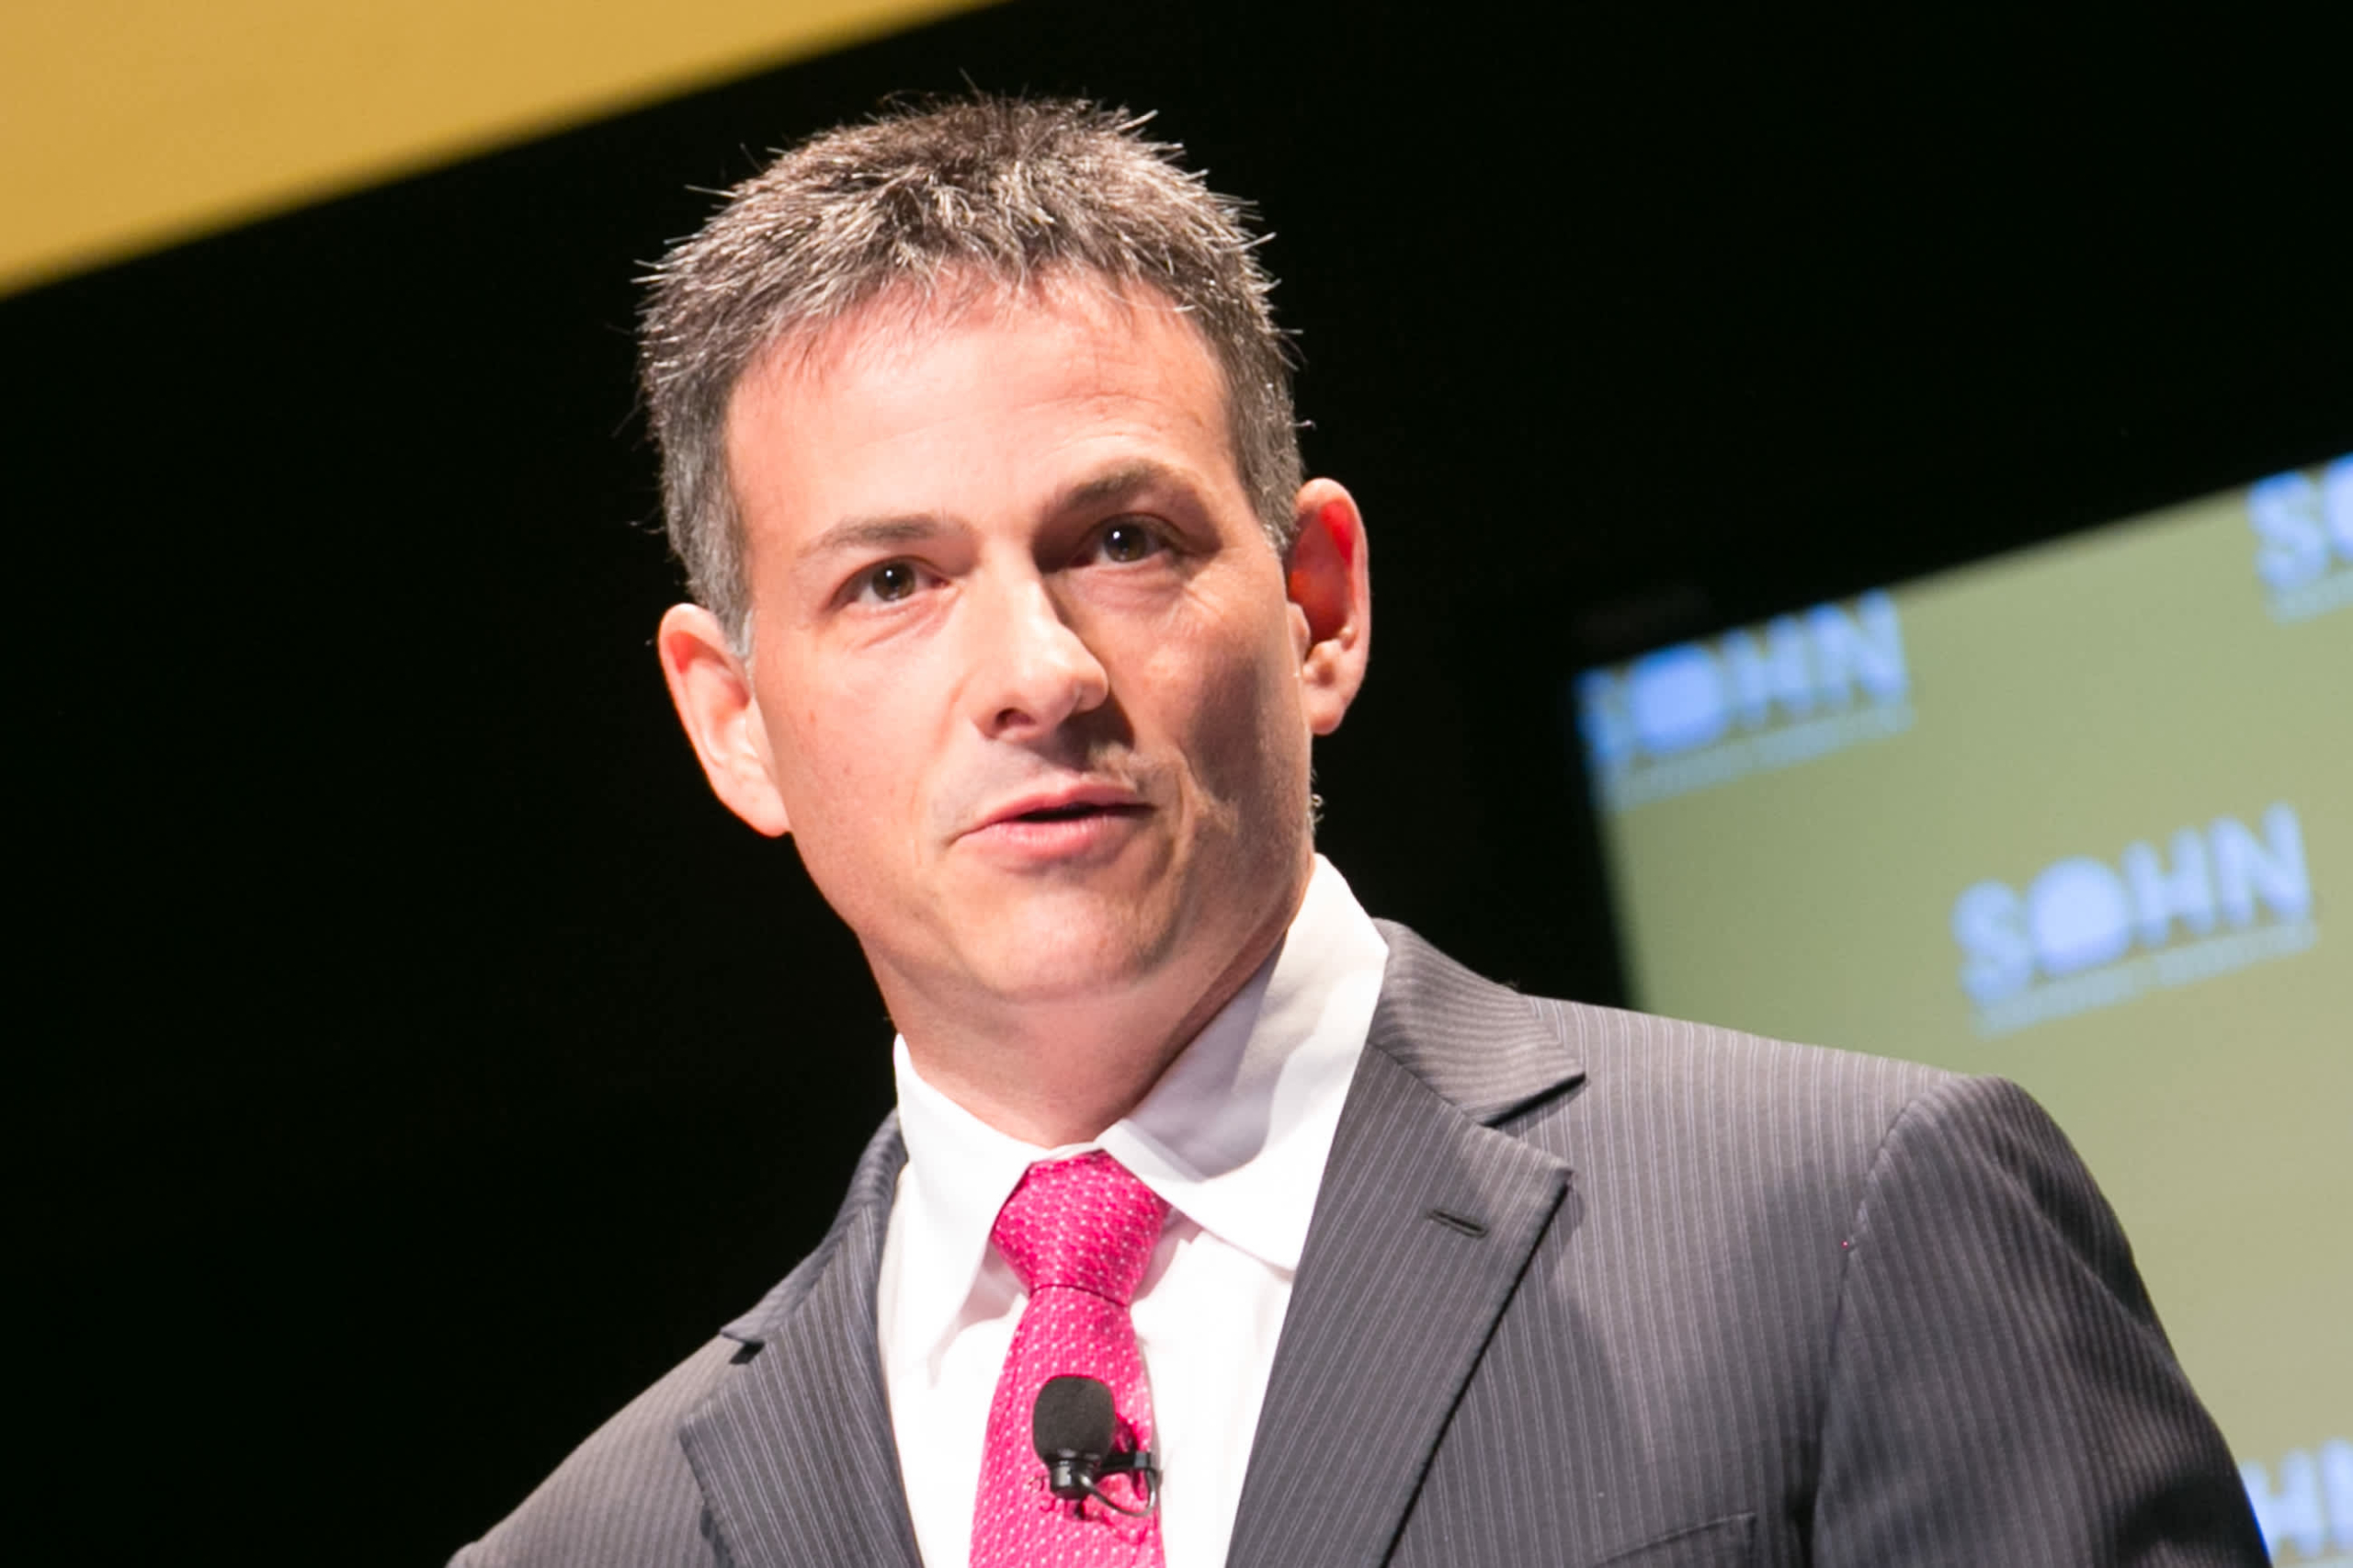 What can you learn from the investment experience of David Einhorn
source https://www.cnbc.com/2017/01/17/heres-how-david-einhorn-is-trading-the-donald-trump-agenda.html